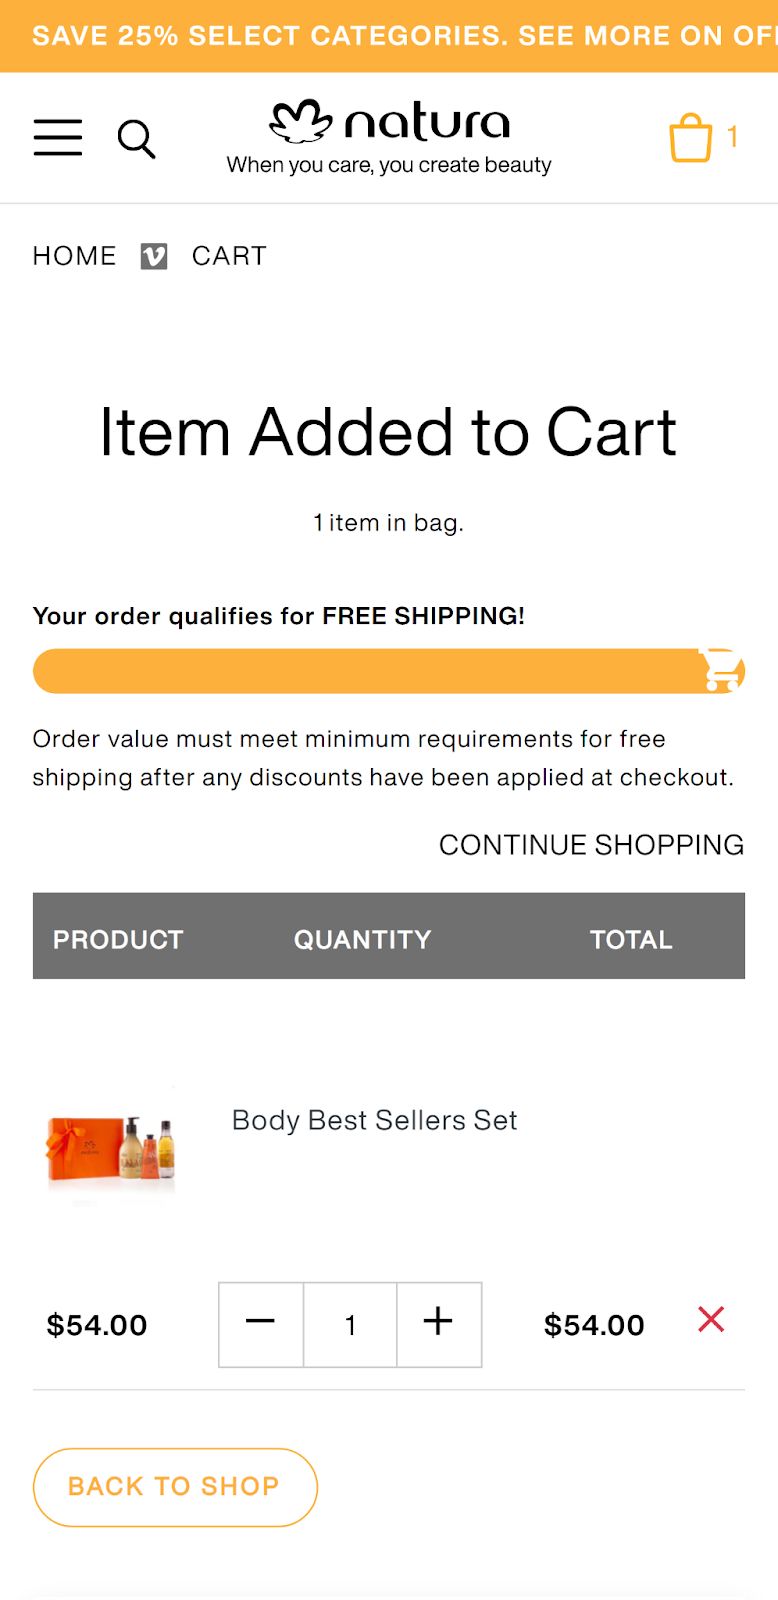 The mobile version of Natura’s ecommerce cart page is easy to navigate.